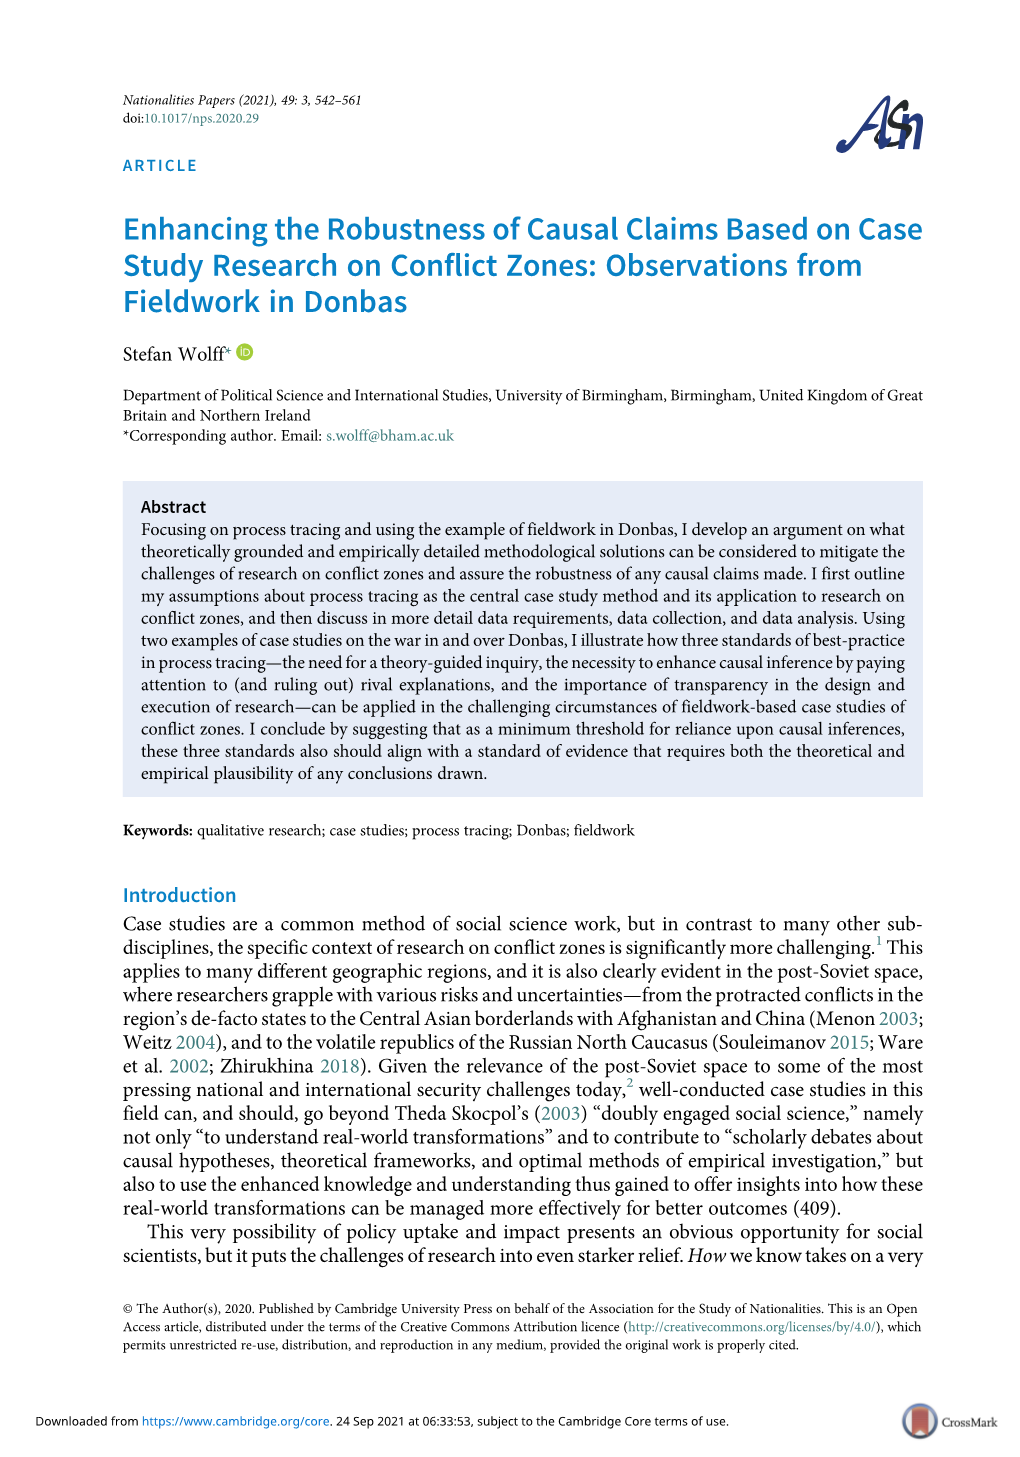 Enhancing the Robustness of Causal Claims Based on Case Study Research on Conflict Zones: Observations from Fieldwork in Donbas